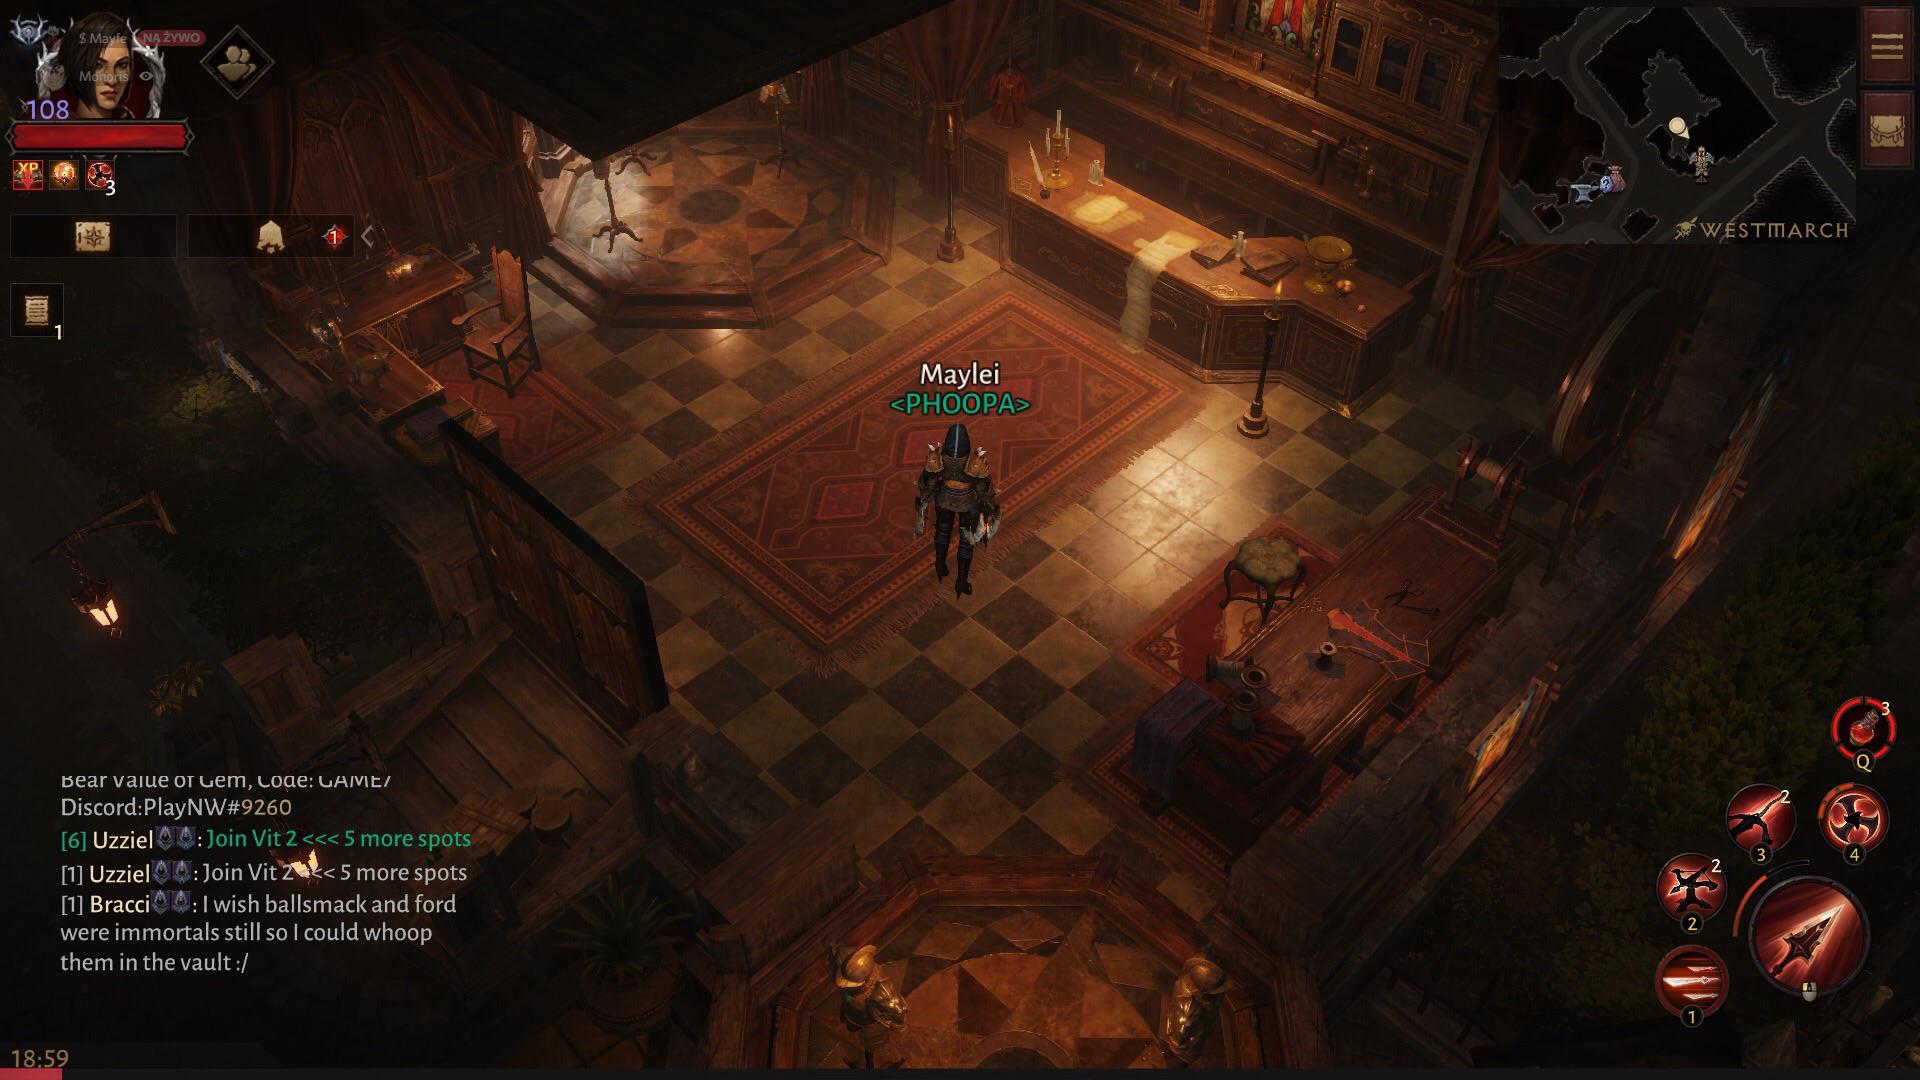 Diablo Immortal PC is hiding a secret room: you can see it's warm, nicely lit, and decorated like a clothing or armour shop